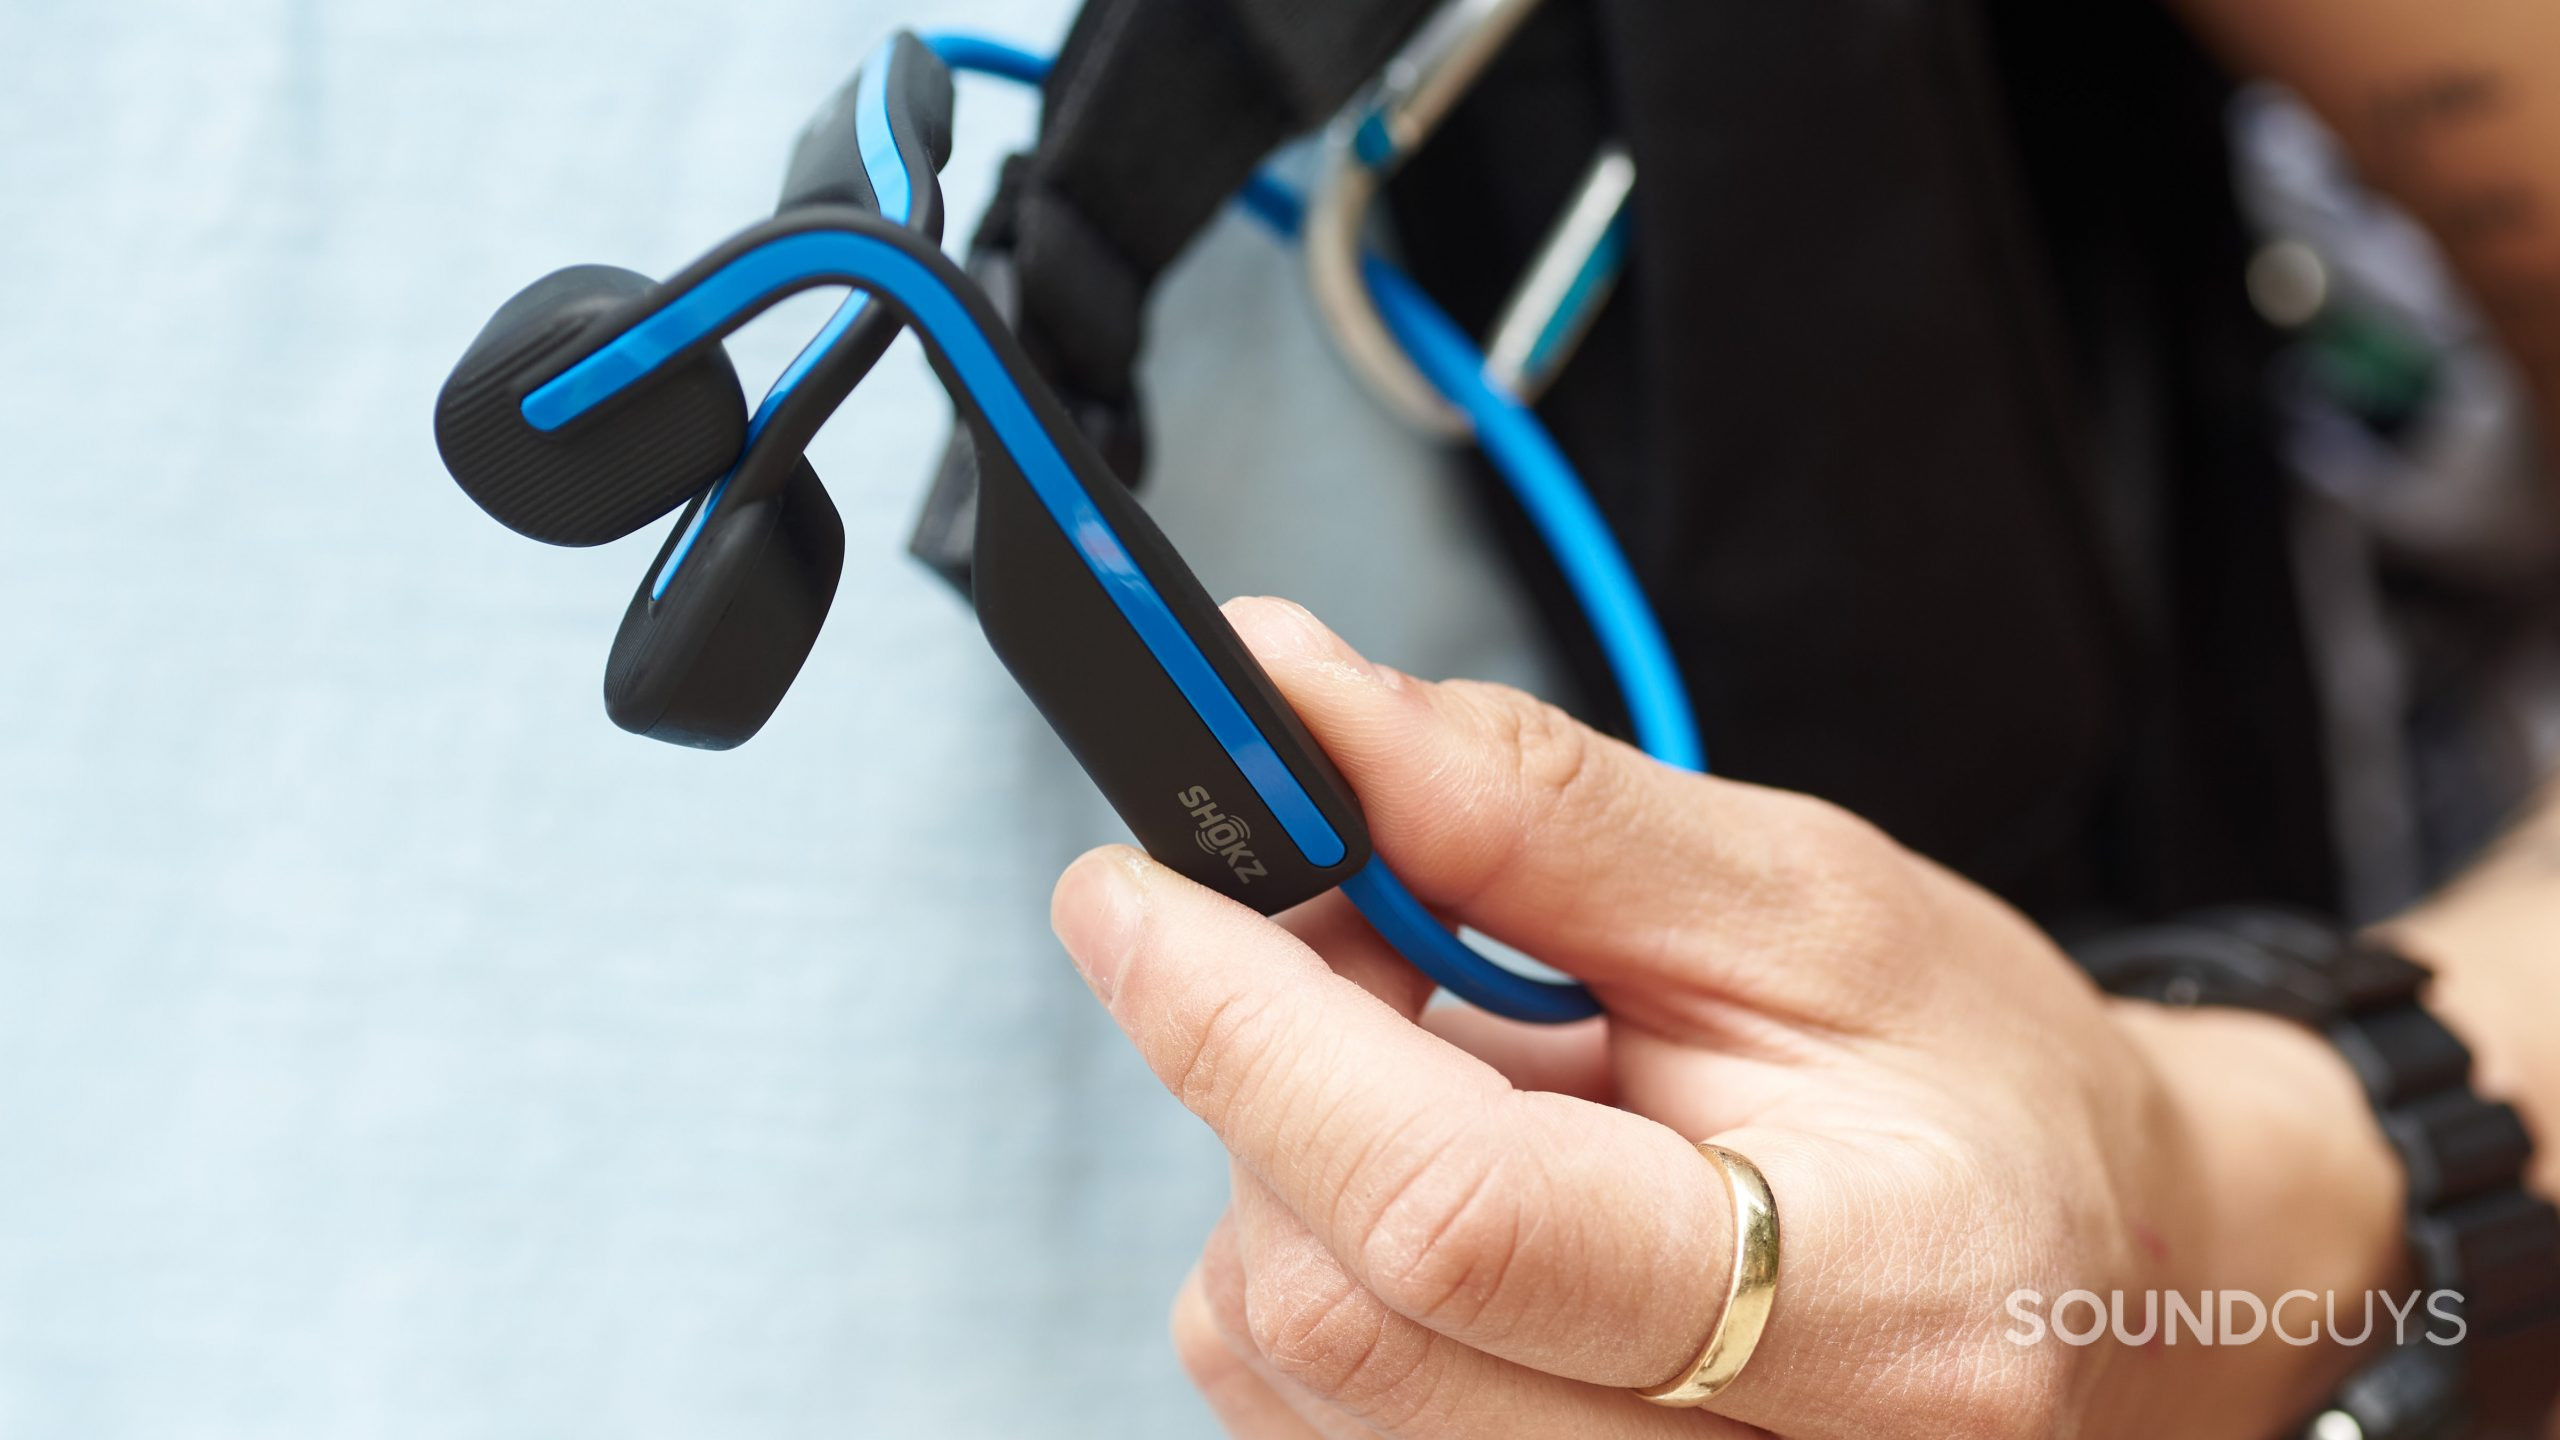 A hand holds the Shokz OpenMove bone conduction headphones in blue before removing the headphones from a carabiner.